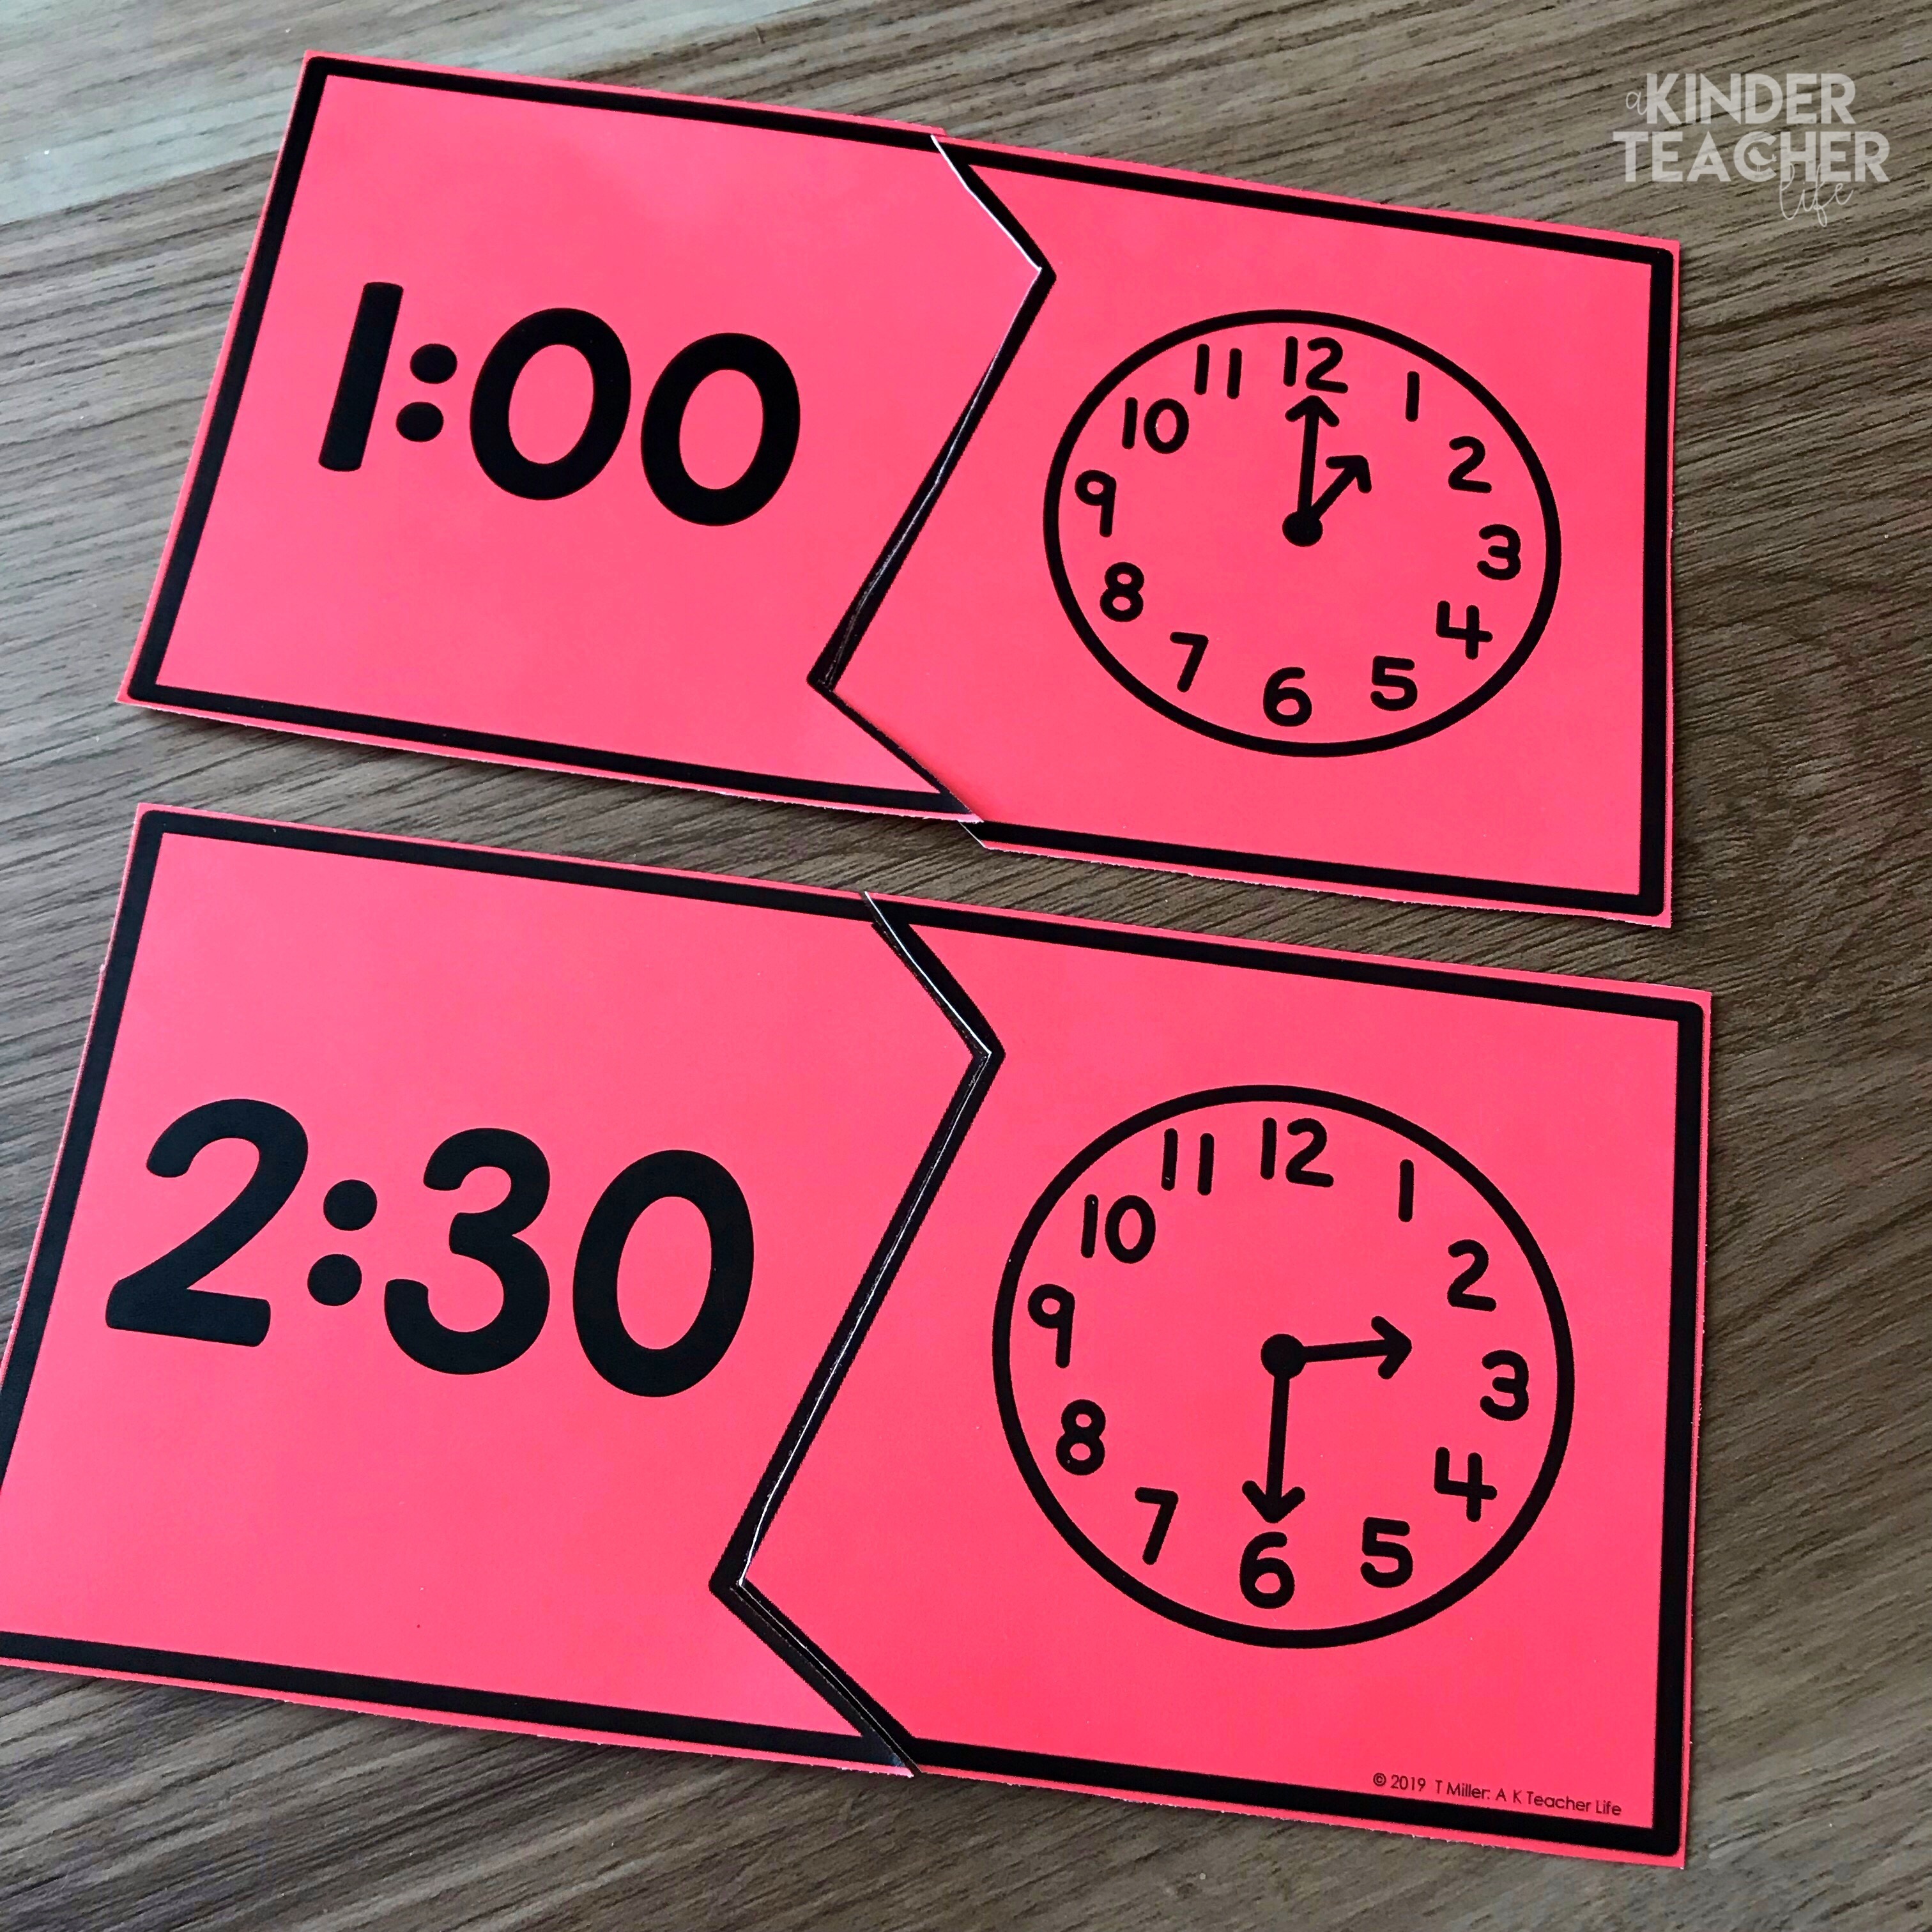 Telling time puzzle - Hands-on telling time math center activities for first grade students. 